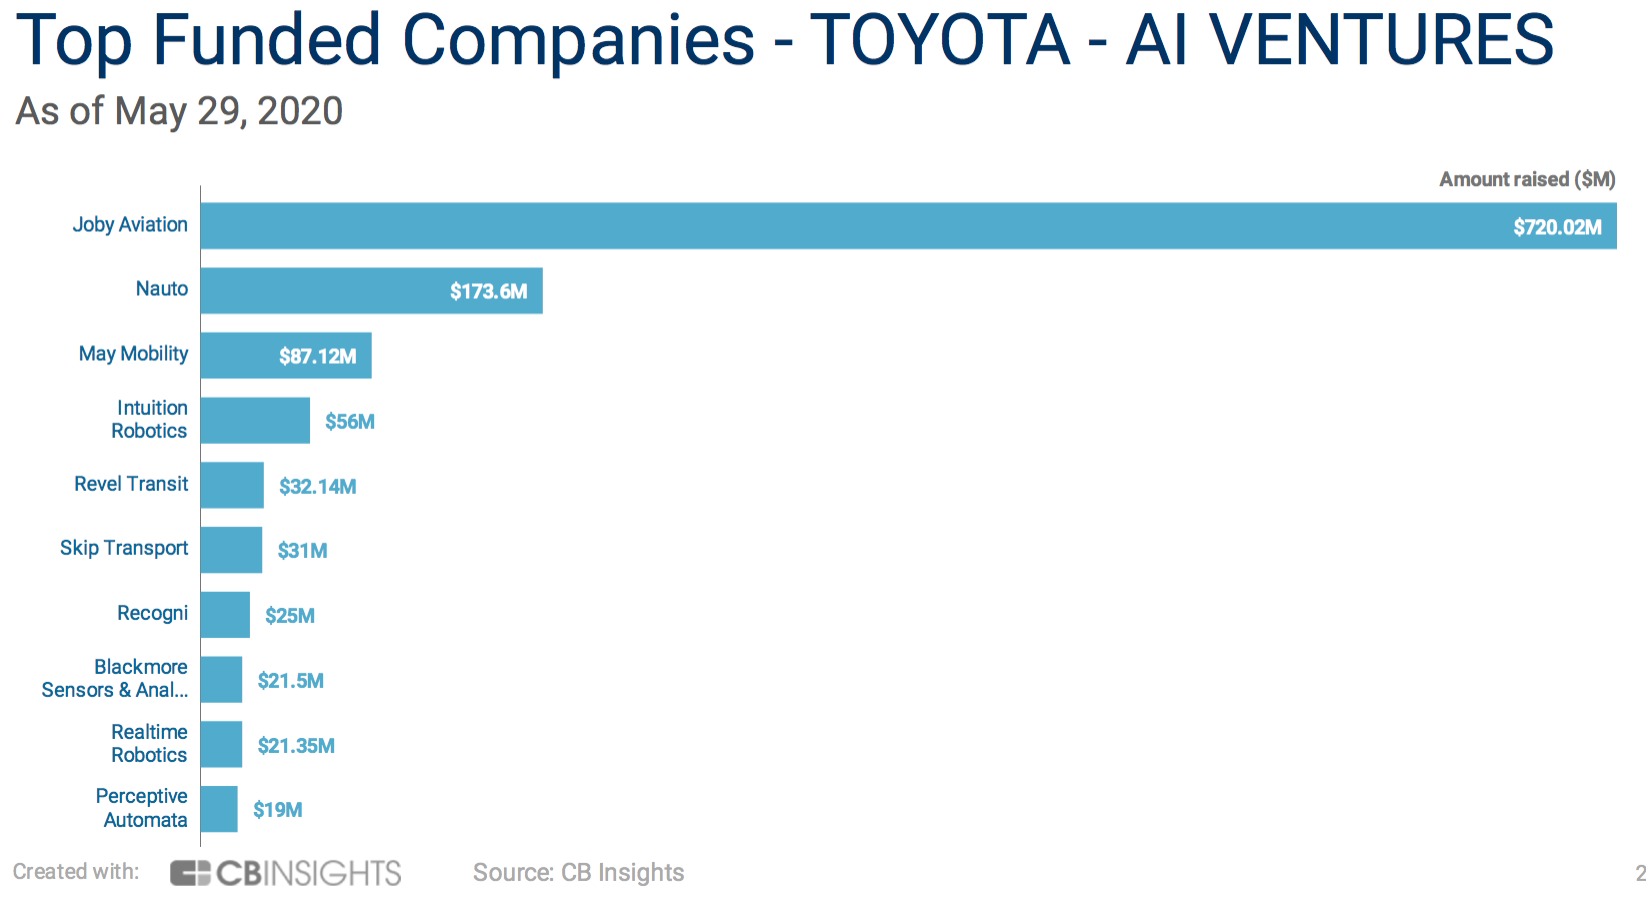 Top Founded Companies- Toyota AI Ventures